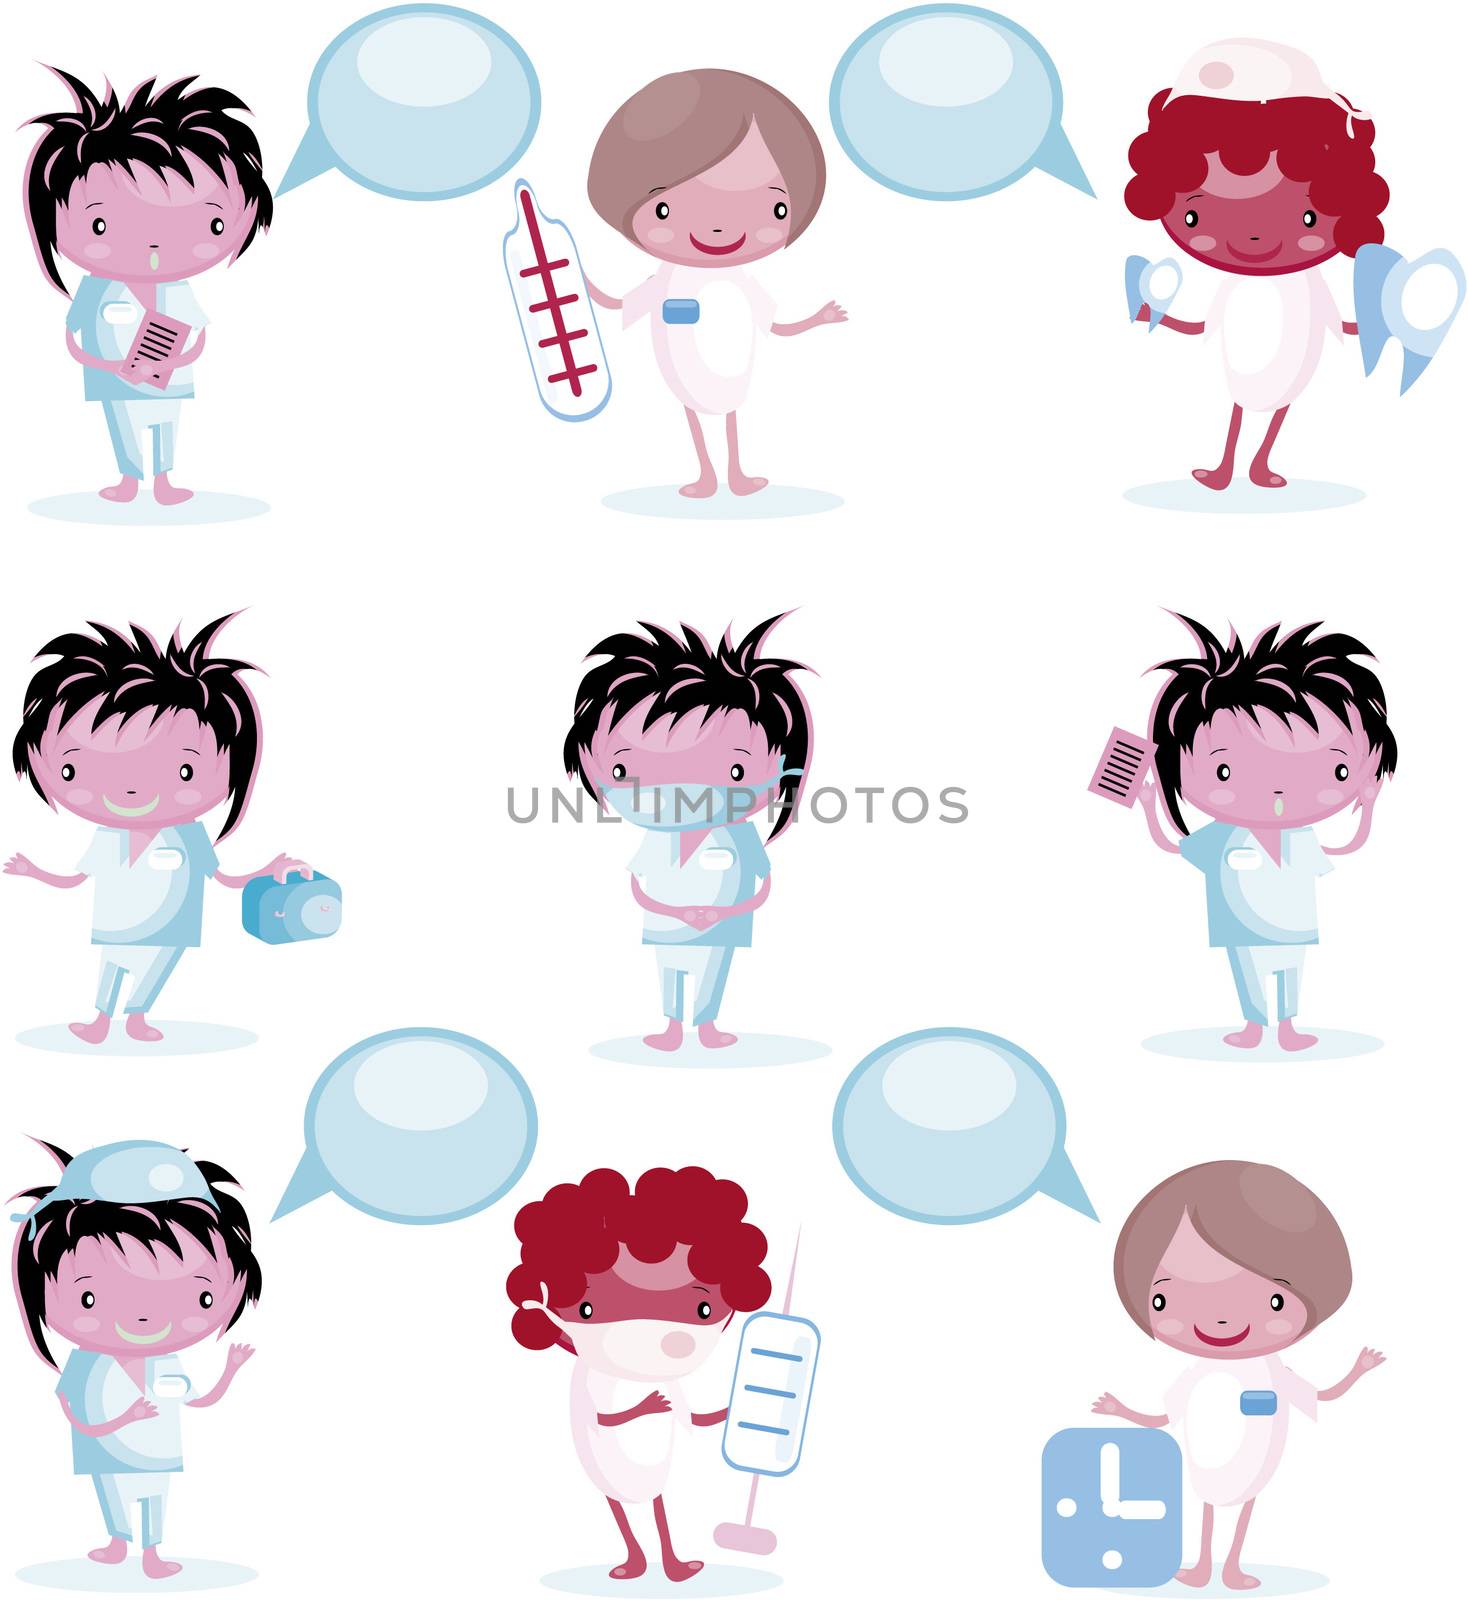 Group of Medical people icons with bubble speech  by IconsJewelry